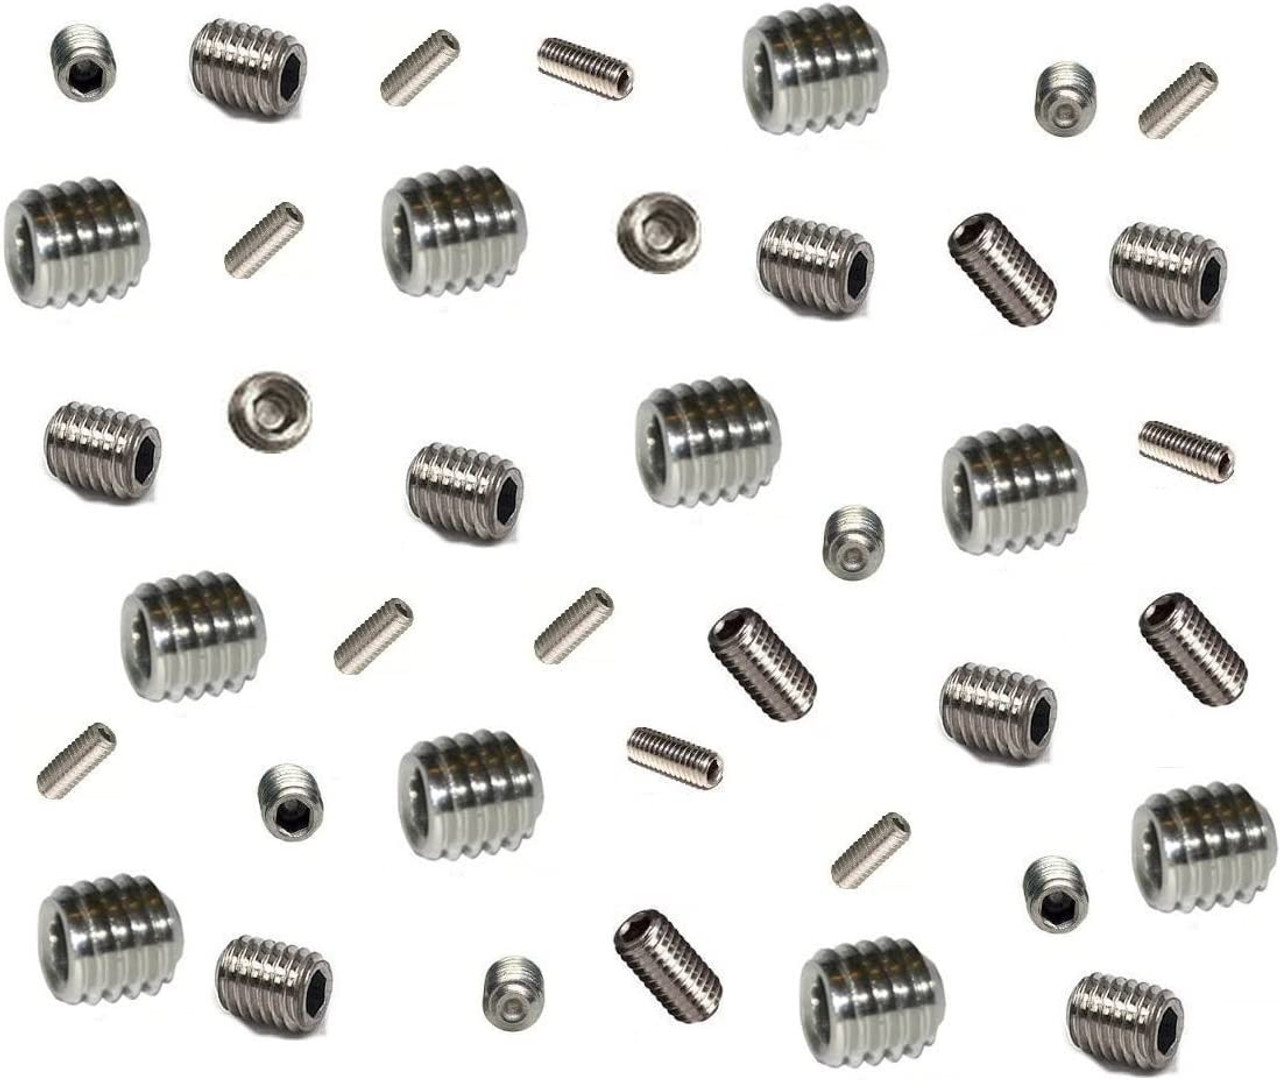 Cup Point Grub Screws Mixed (16 Pack) 6mm Length, Various Metric Threads, M3, M4, M5 & M6. A2 Grade Stainless Steel Hex / Allen Key Socket Cup Point Grub Screw / Set Screws. See Product Description for Full List